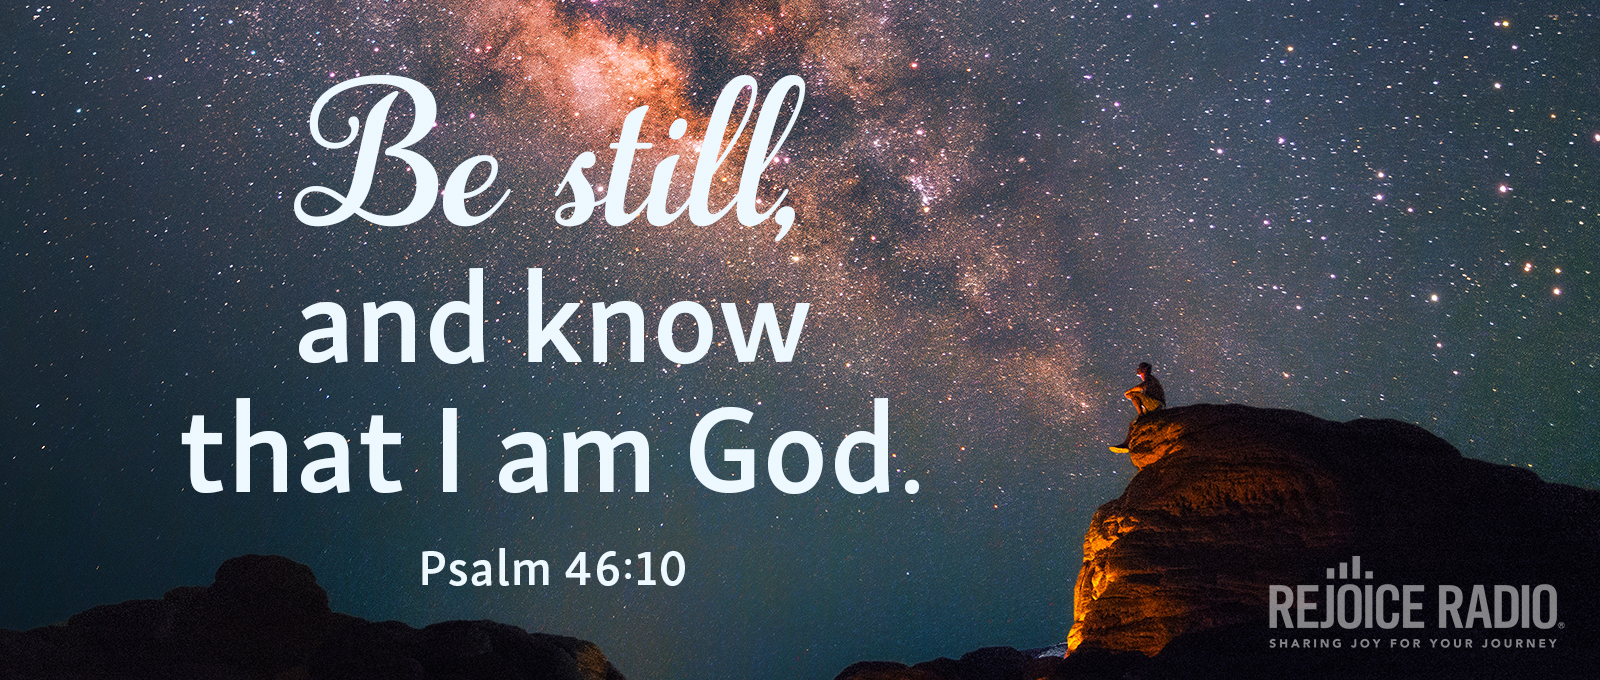 August 1-31 verse slider - Be still, and know that I am God. Psalm 46:10